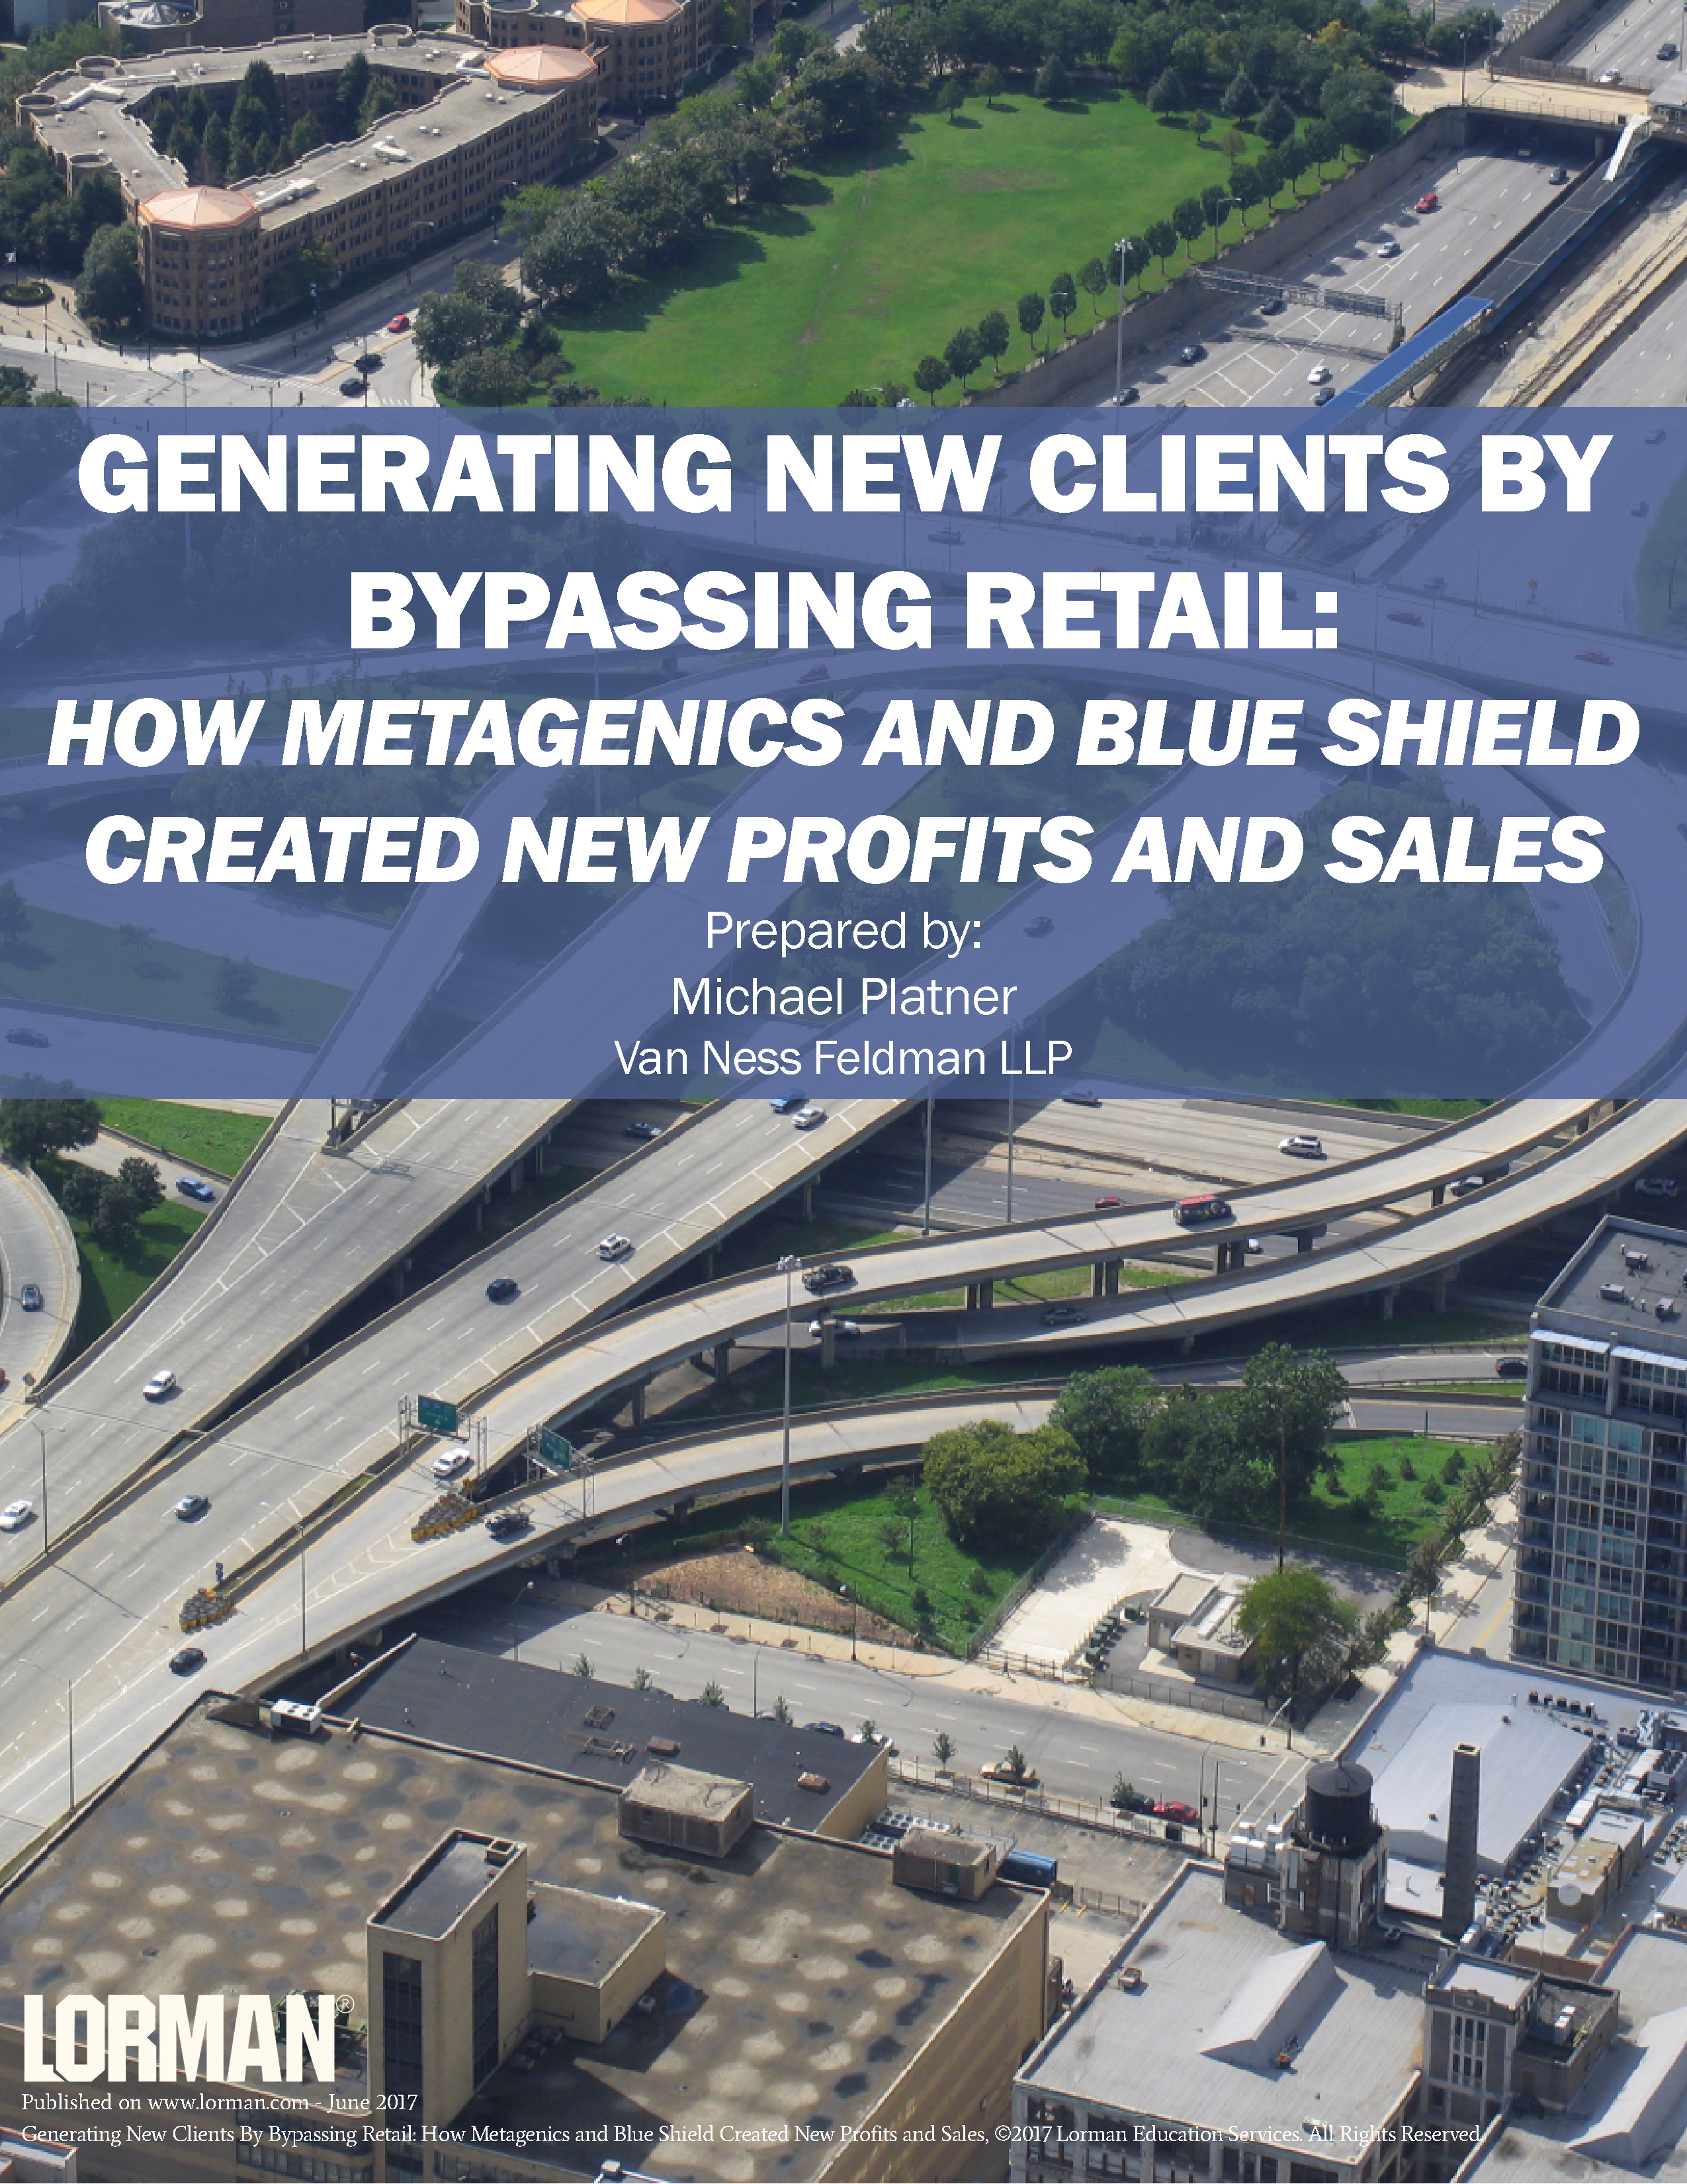 Generating New Clients By Bypassing Retail: How Metagenics & Blue Shield Created New Profits & Sales